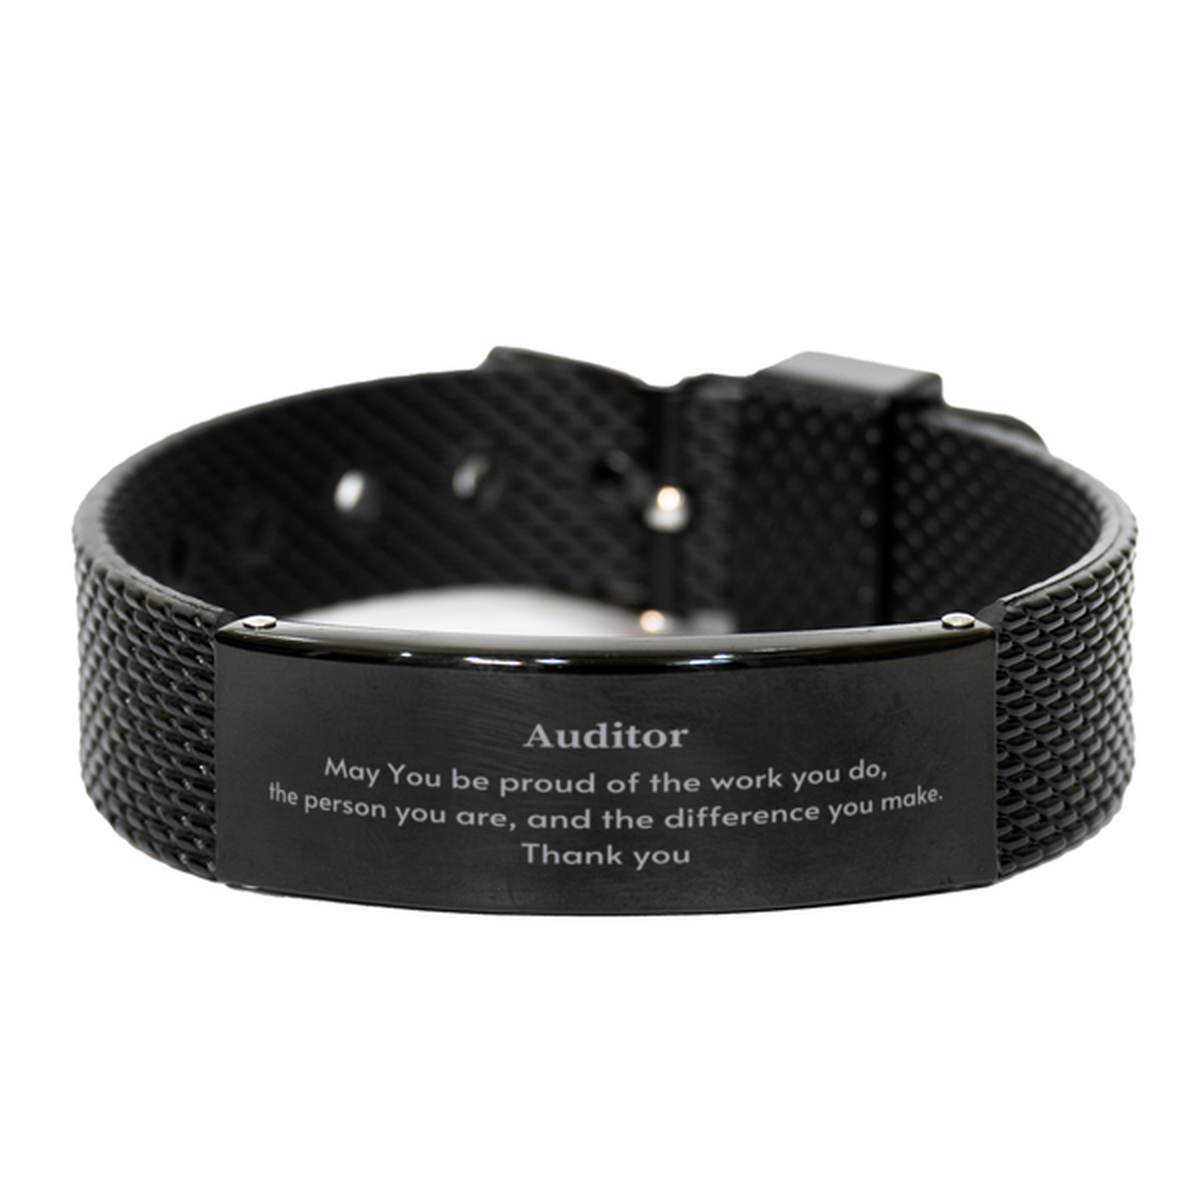 Heartwarming Black Shark Mesh Bracelet Retirement Coworkers Gifts for Auditor, Auditor May You be proud of the work you do, the person you are Gifts for Boss Men Women Friends